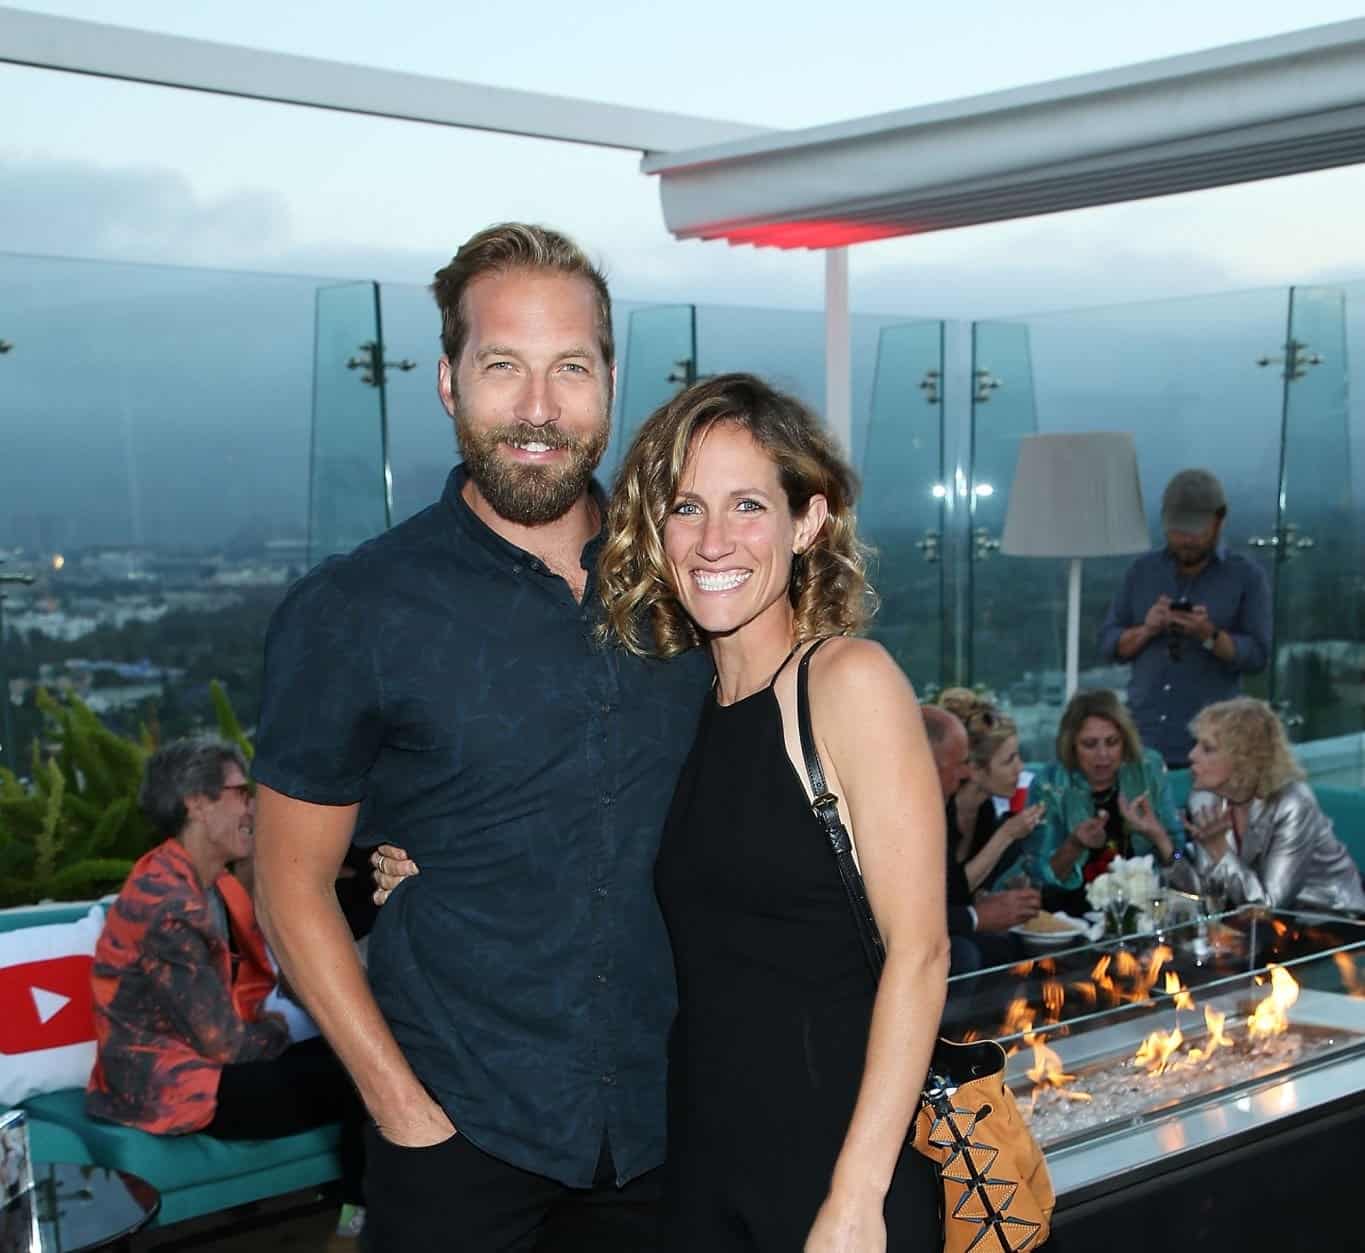 Image of Ryan Hansen with his wife, Amy Russell